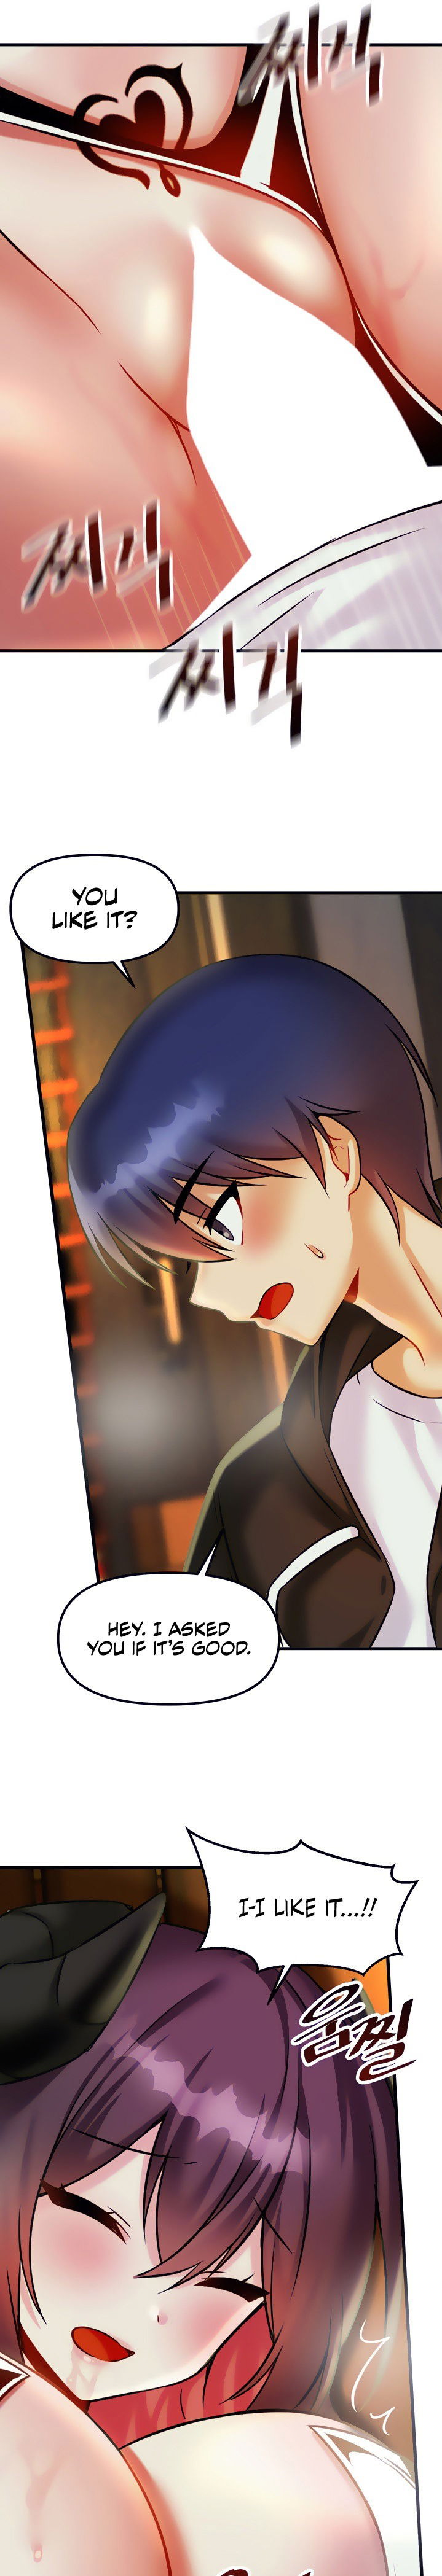 trapped-in-the-academys-eroge-chap-19-27